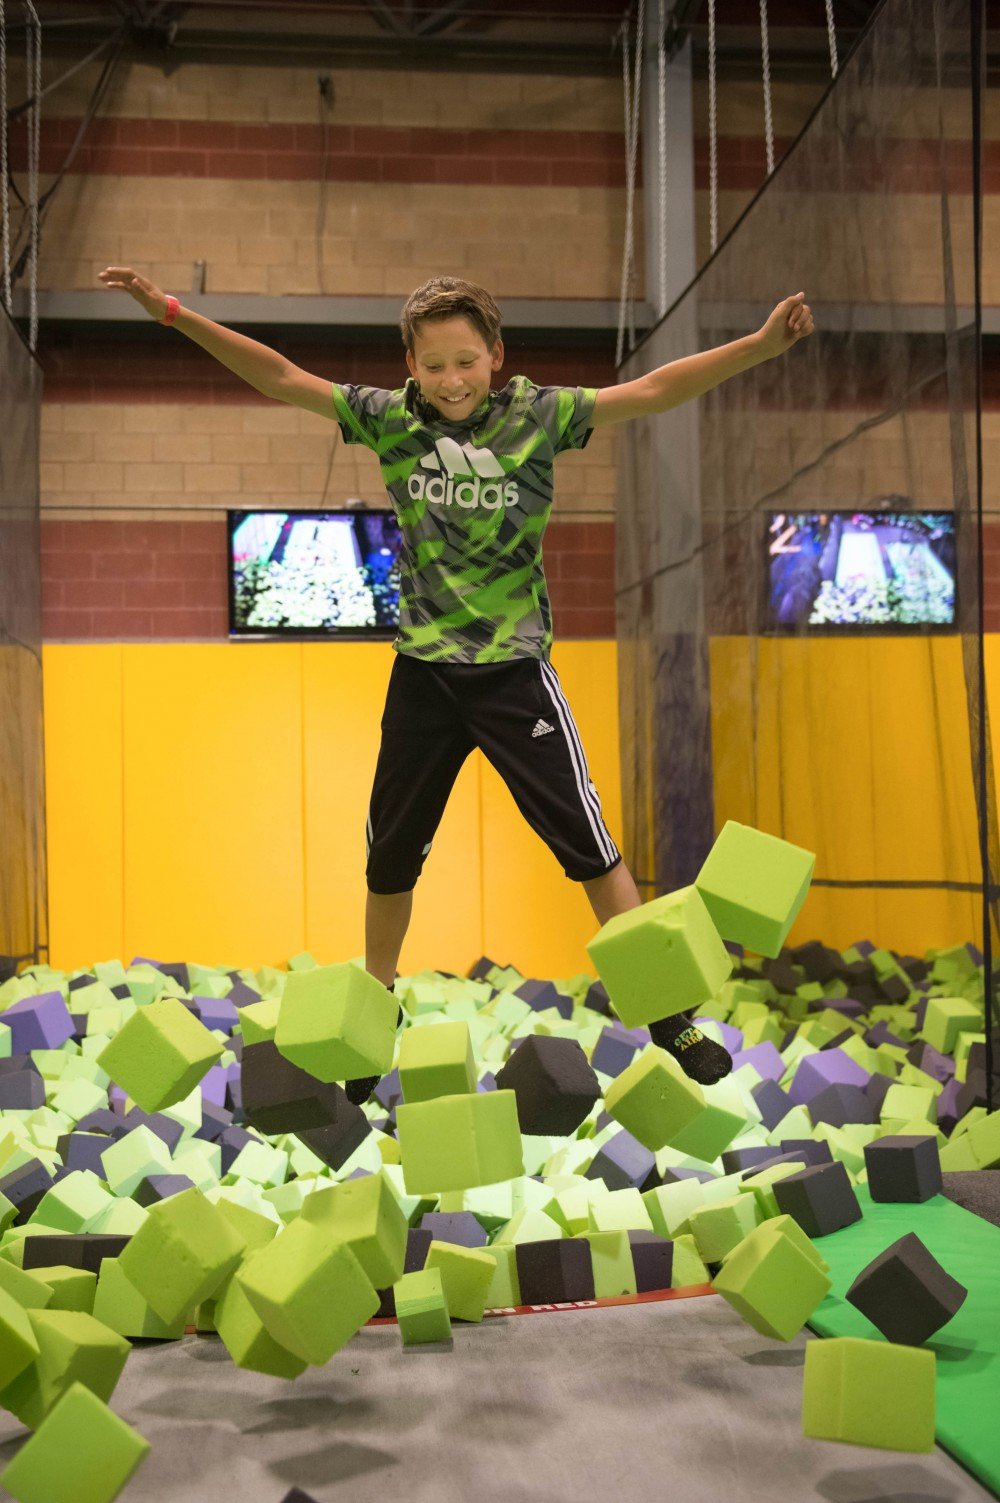 jumping in the foam pit